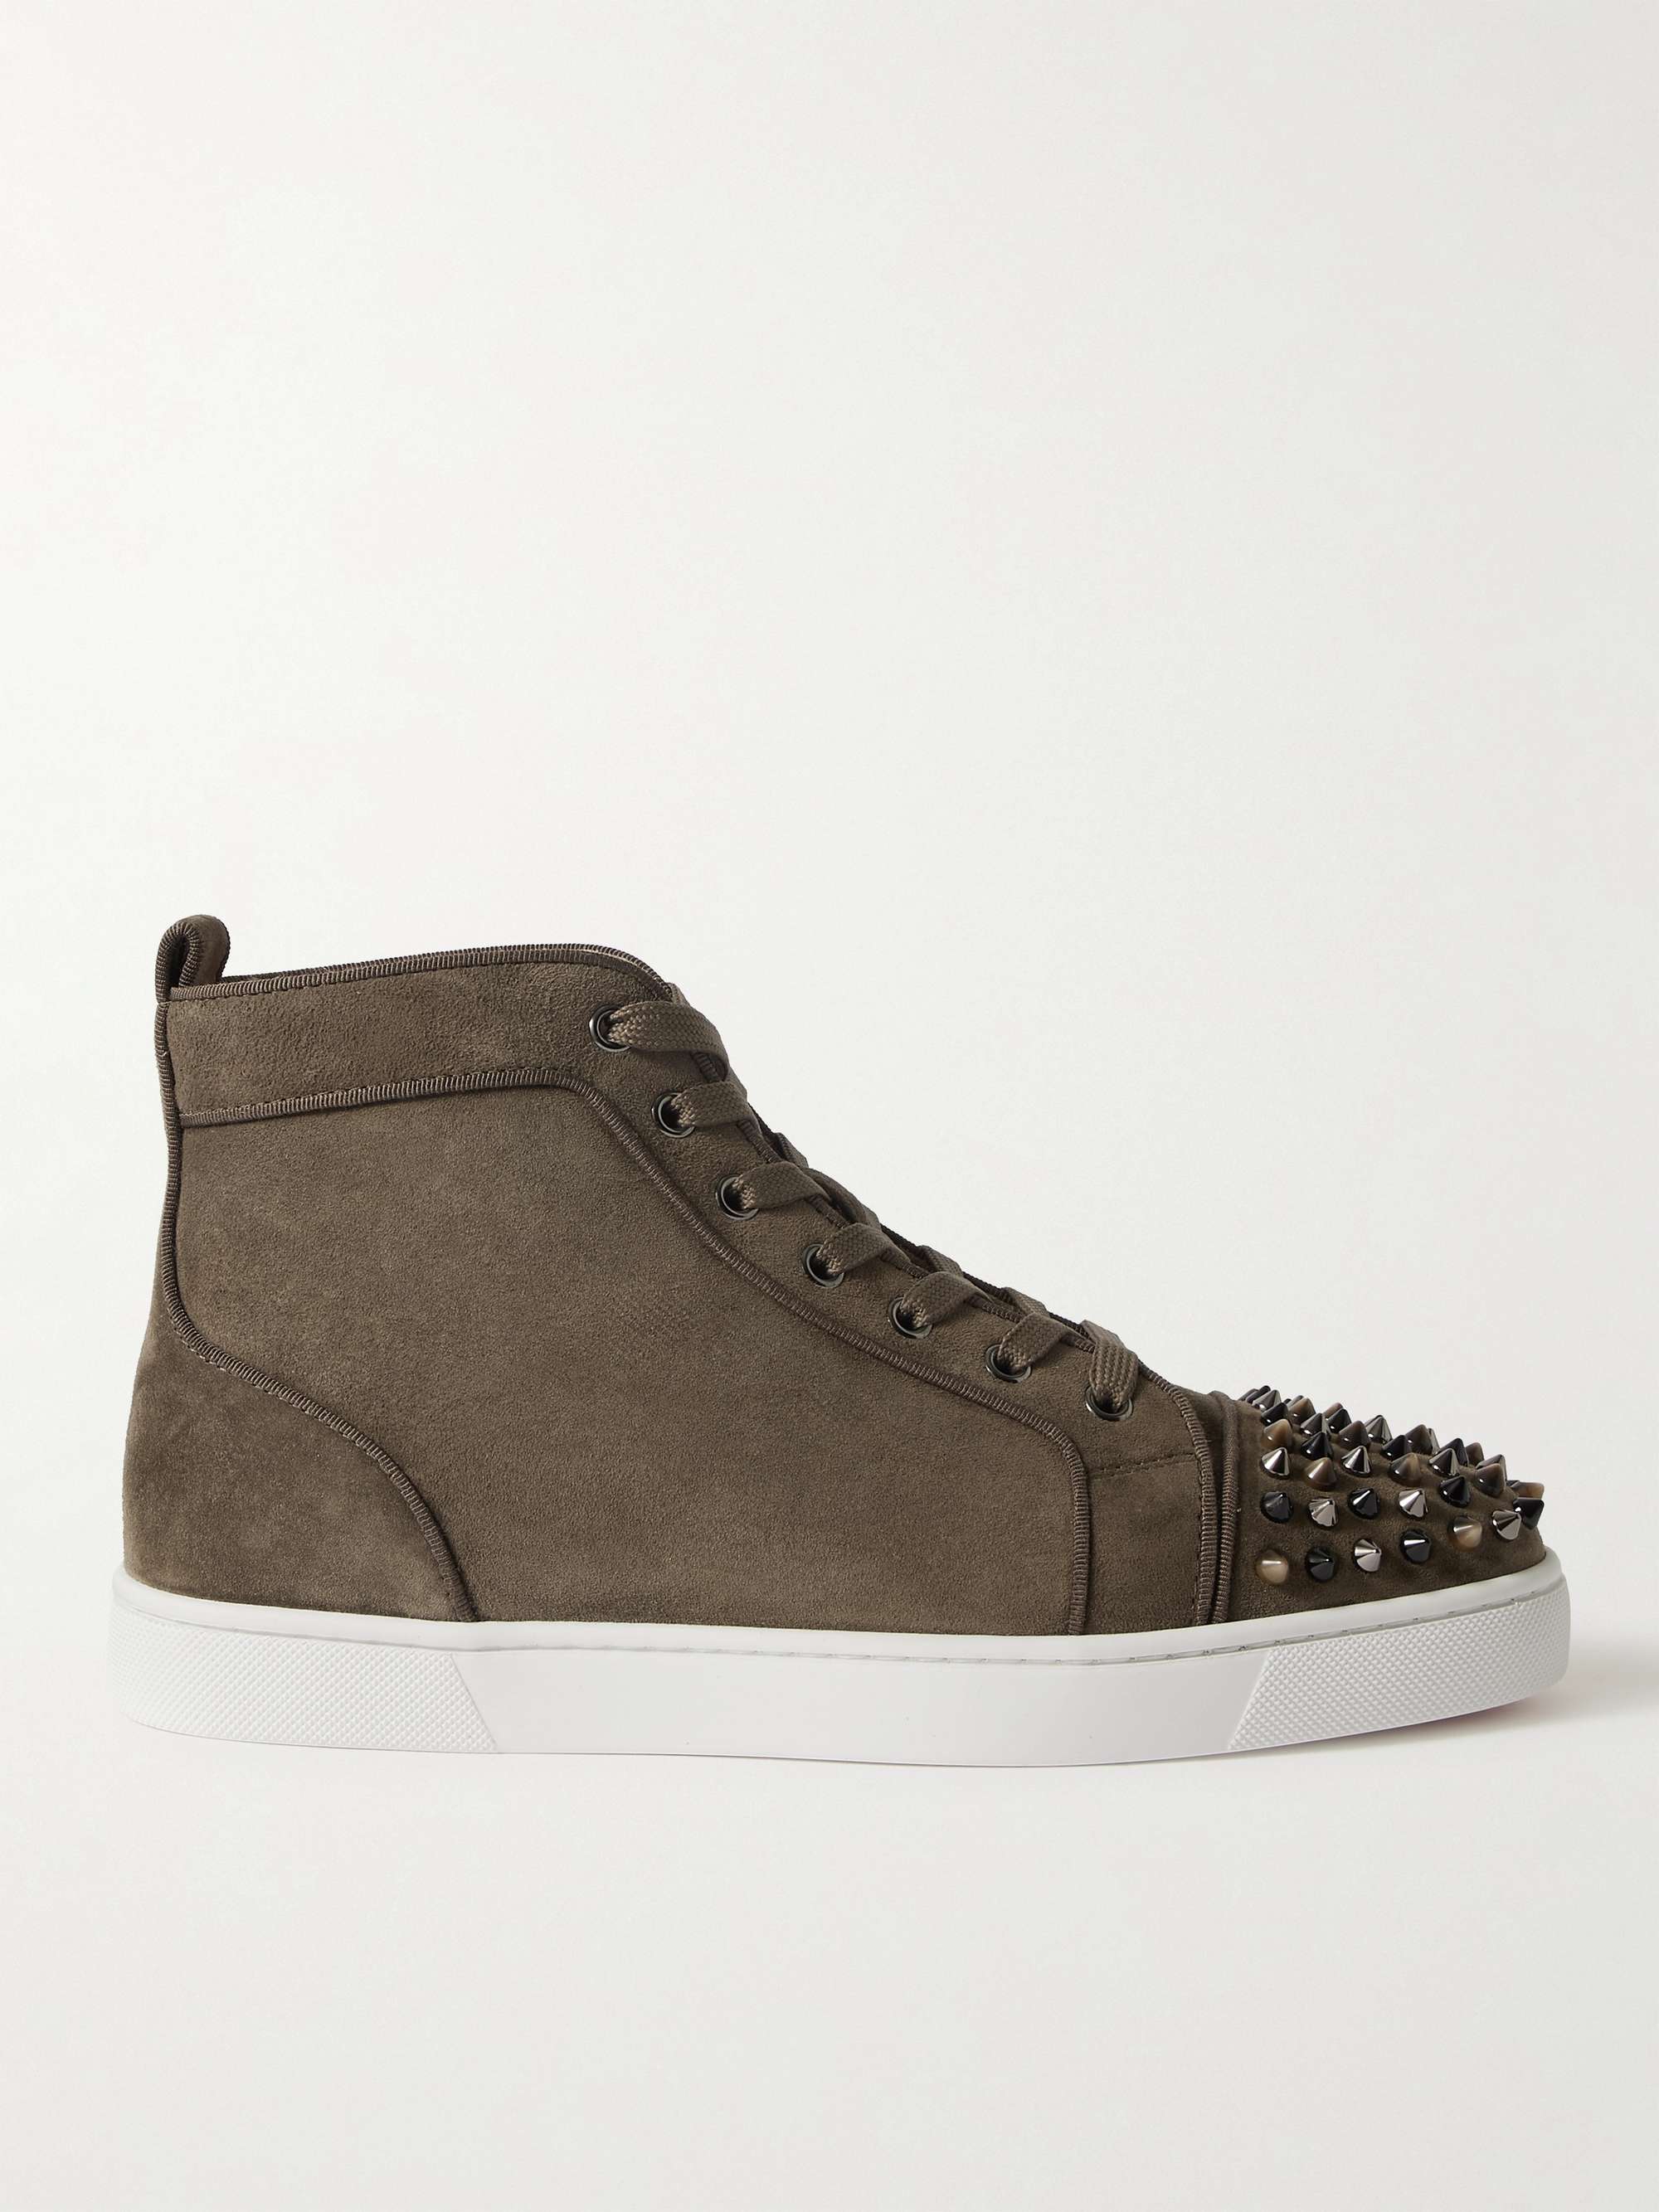 CHRISTIAN LOUBOUTIN Lou Spikes Orlato Suede High-Top Sneakers